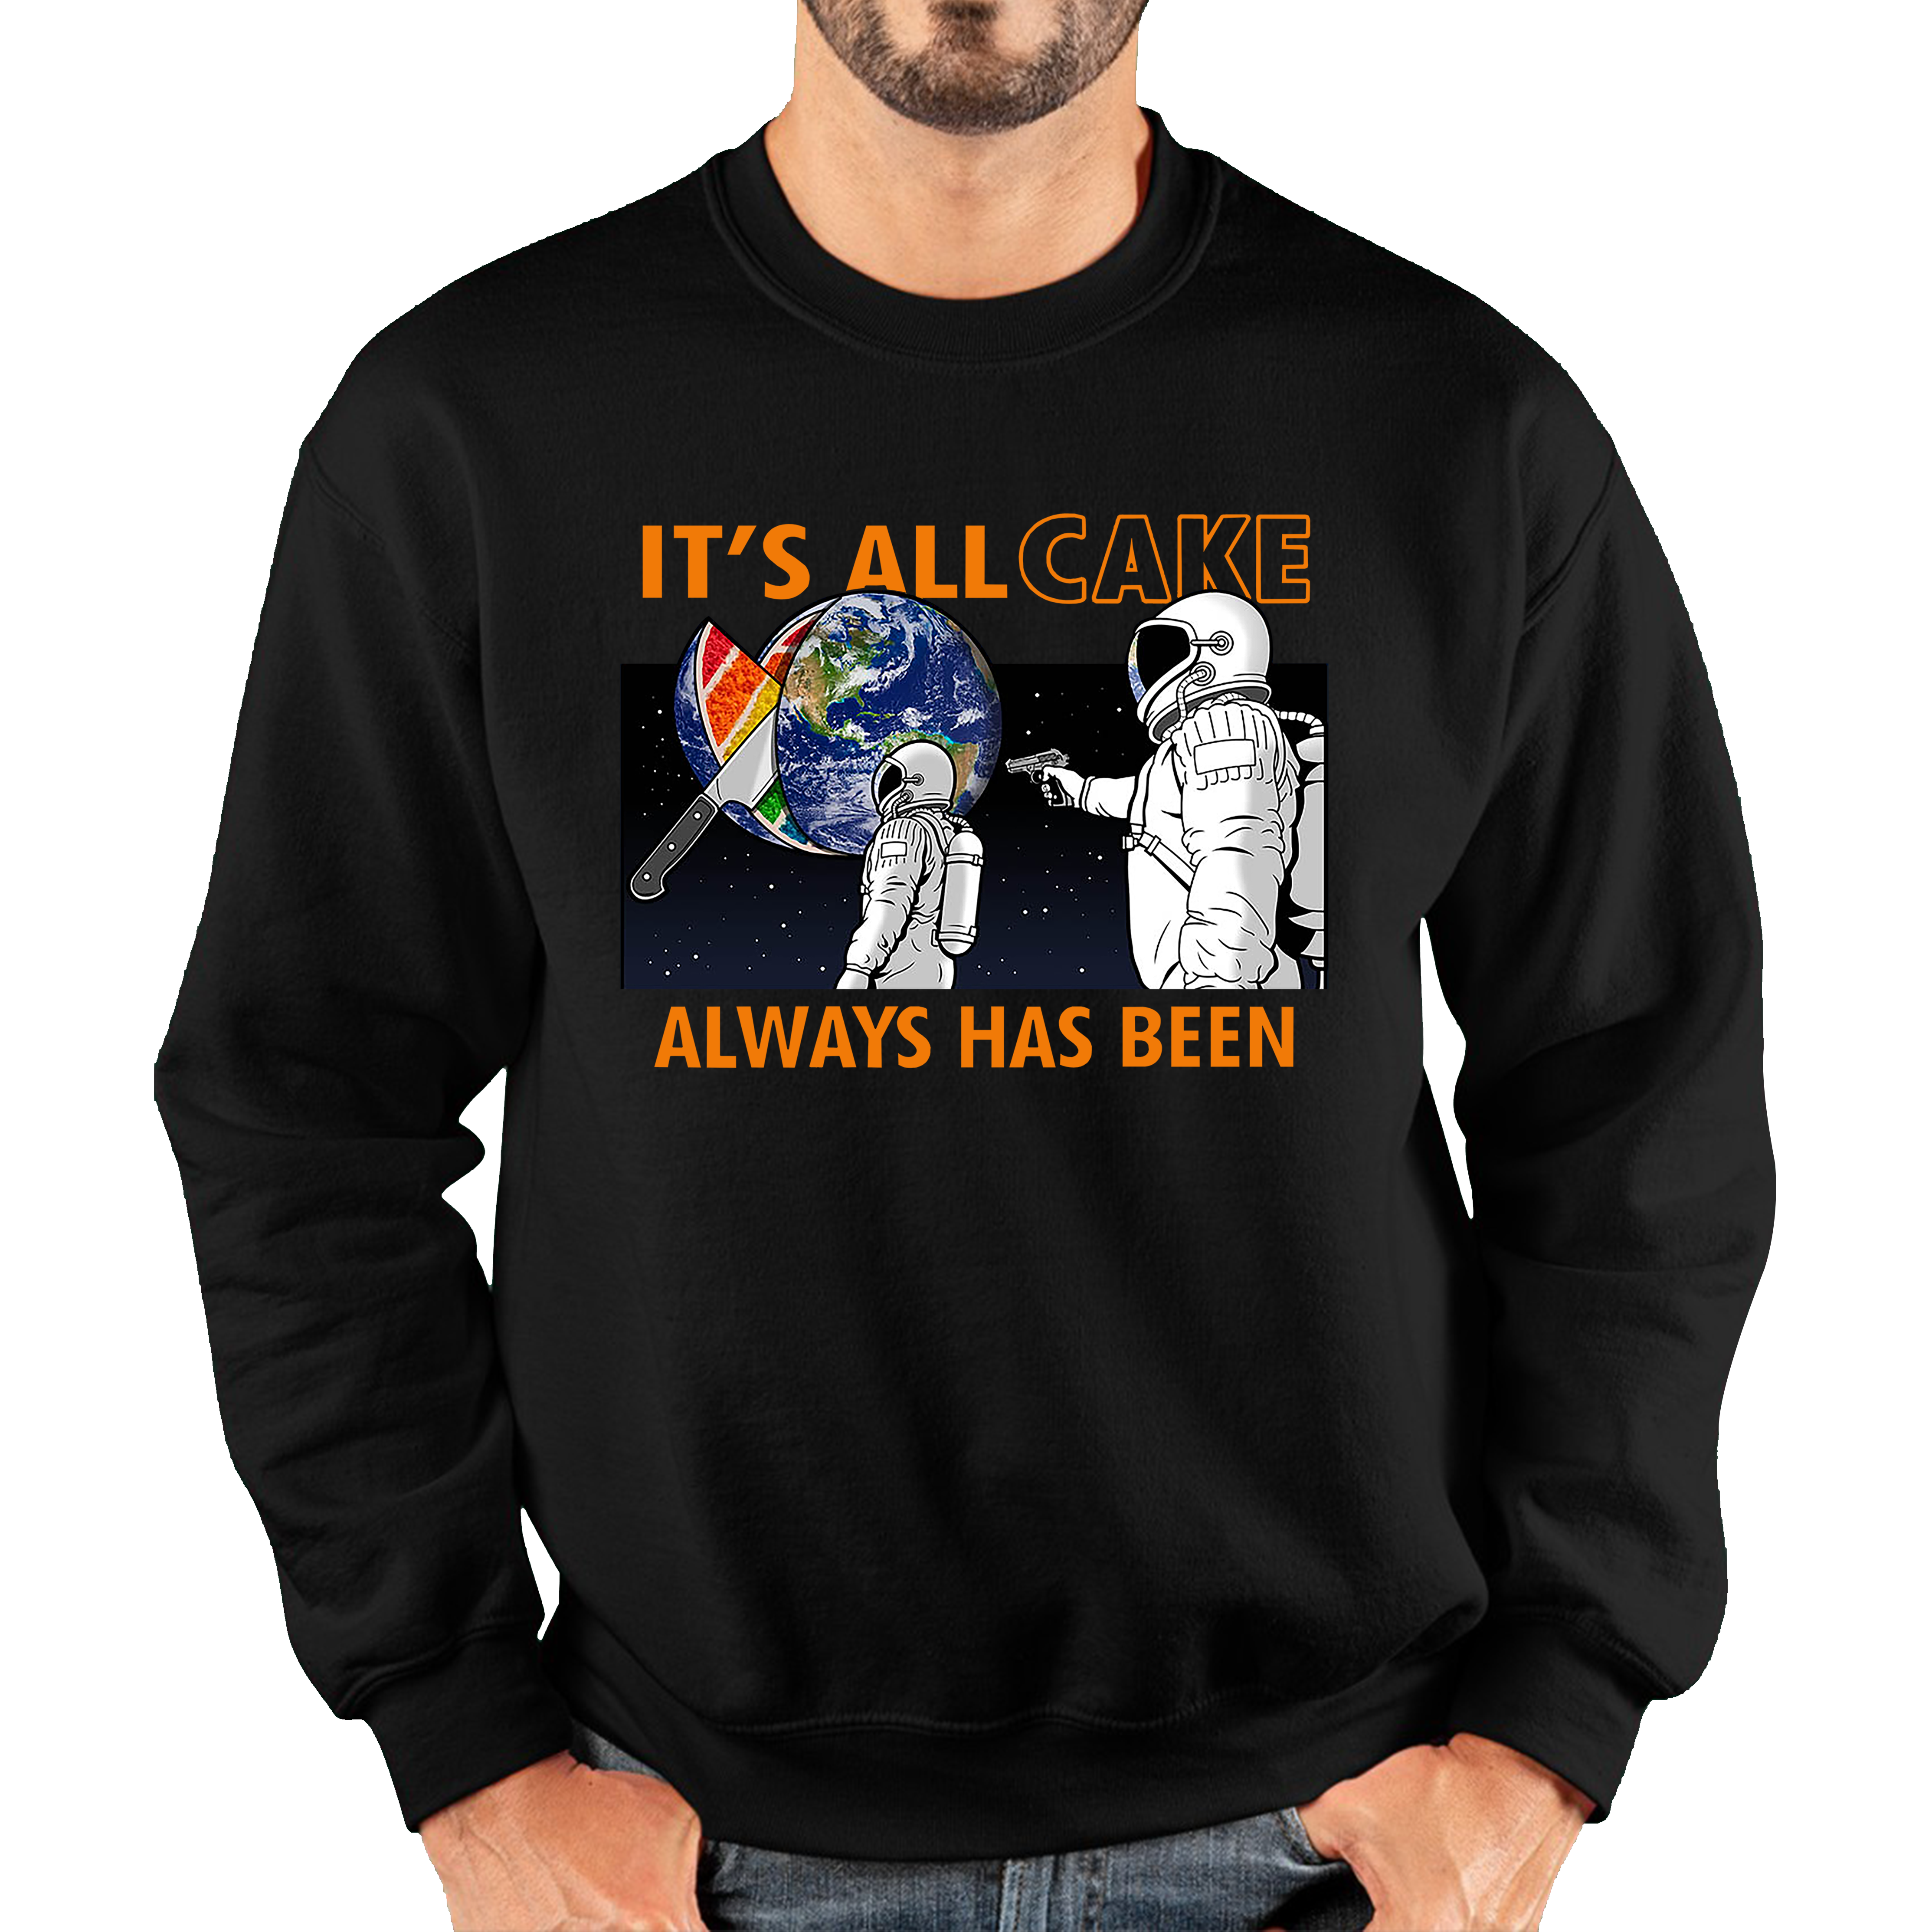 It's All Cake (Always Has Been) Astronaut Space Picture Funny Saying Novelty Meme Adult Sweatshirt